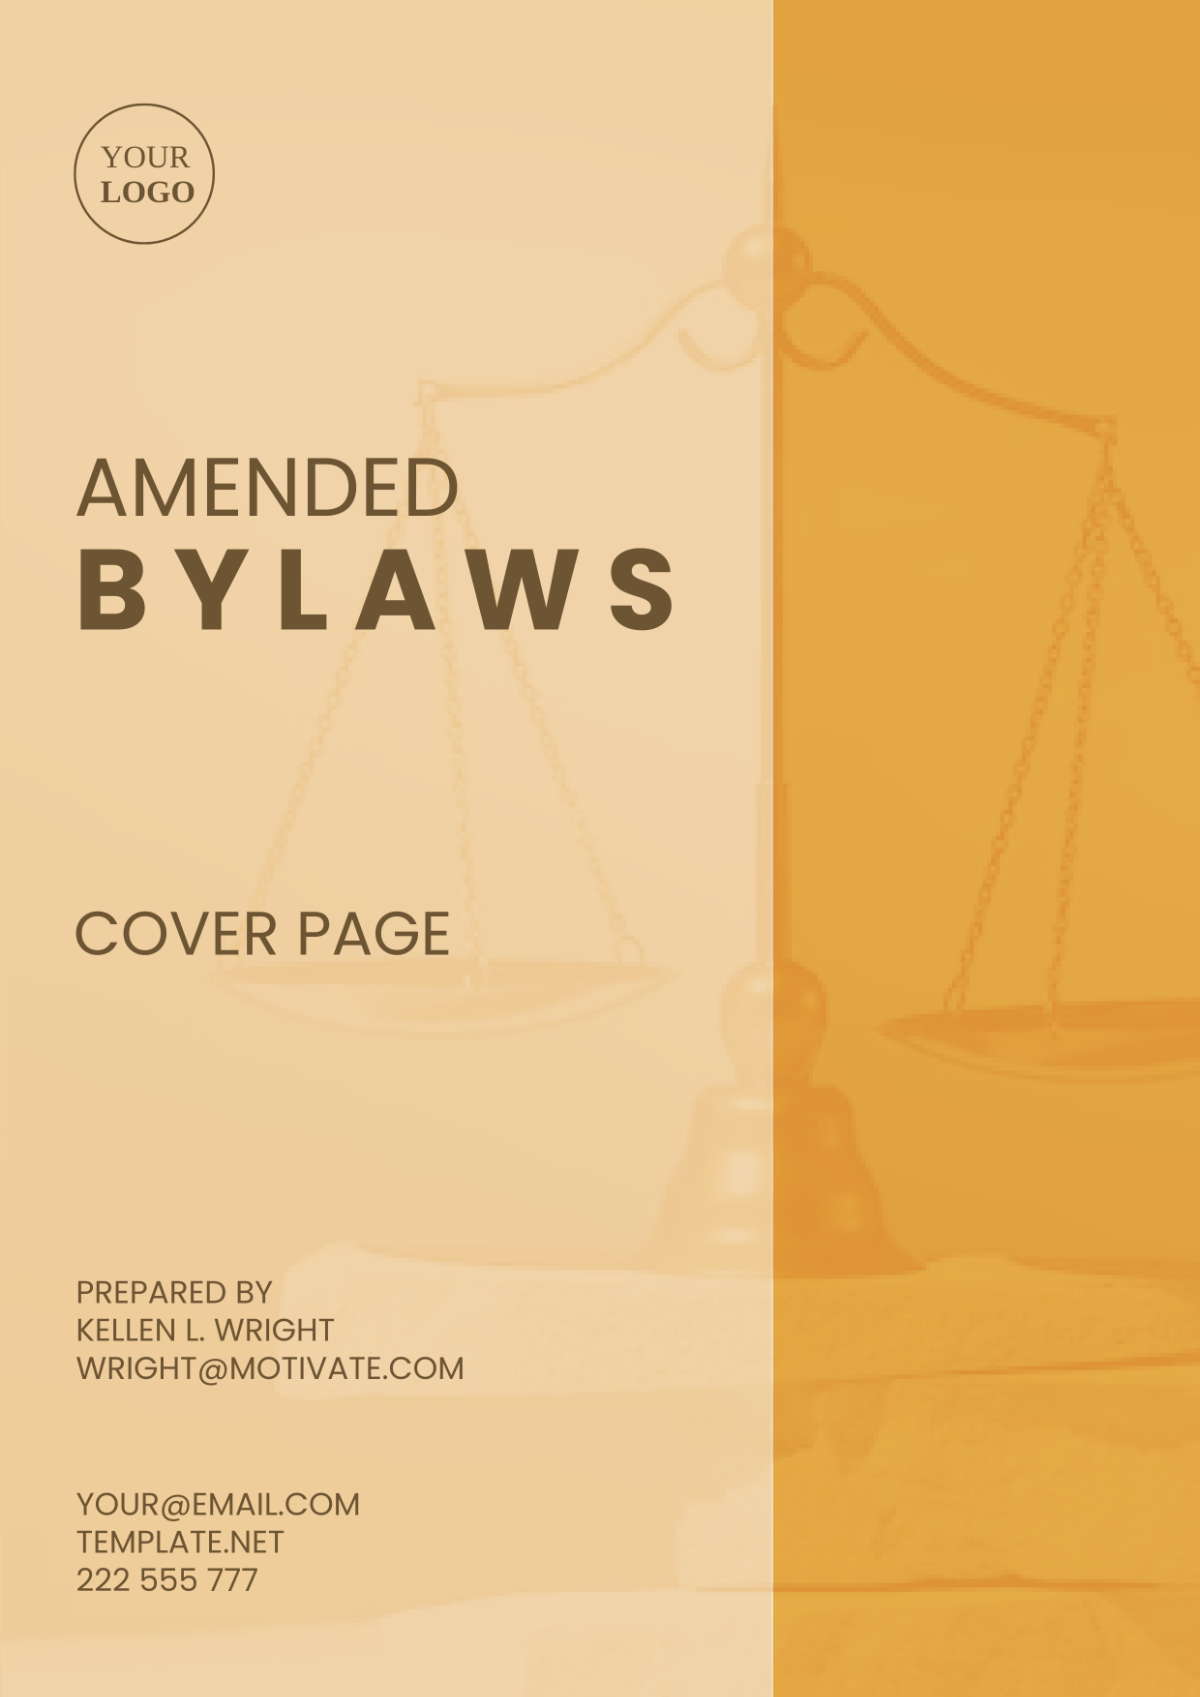 Amended Bylaws Cover Page Template